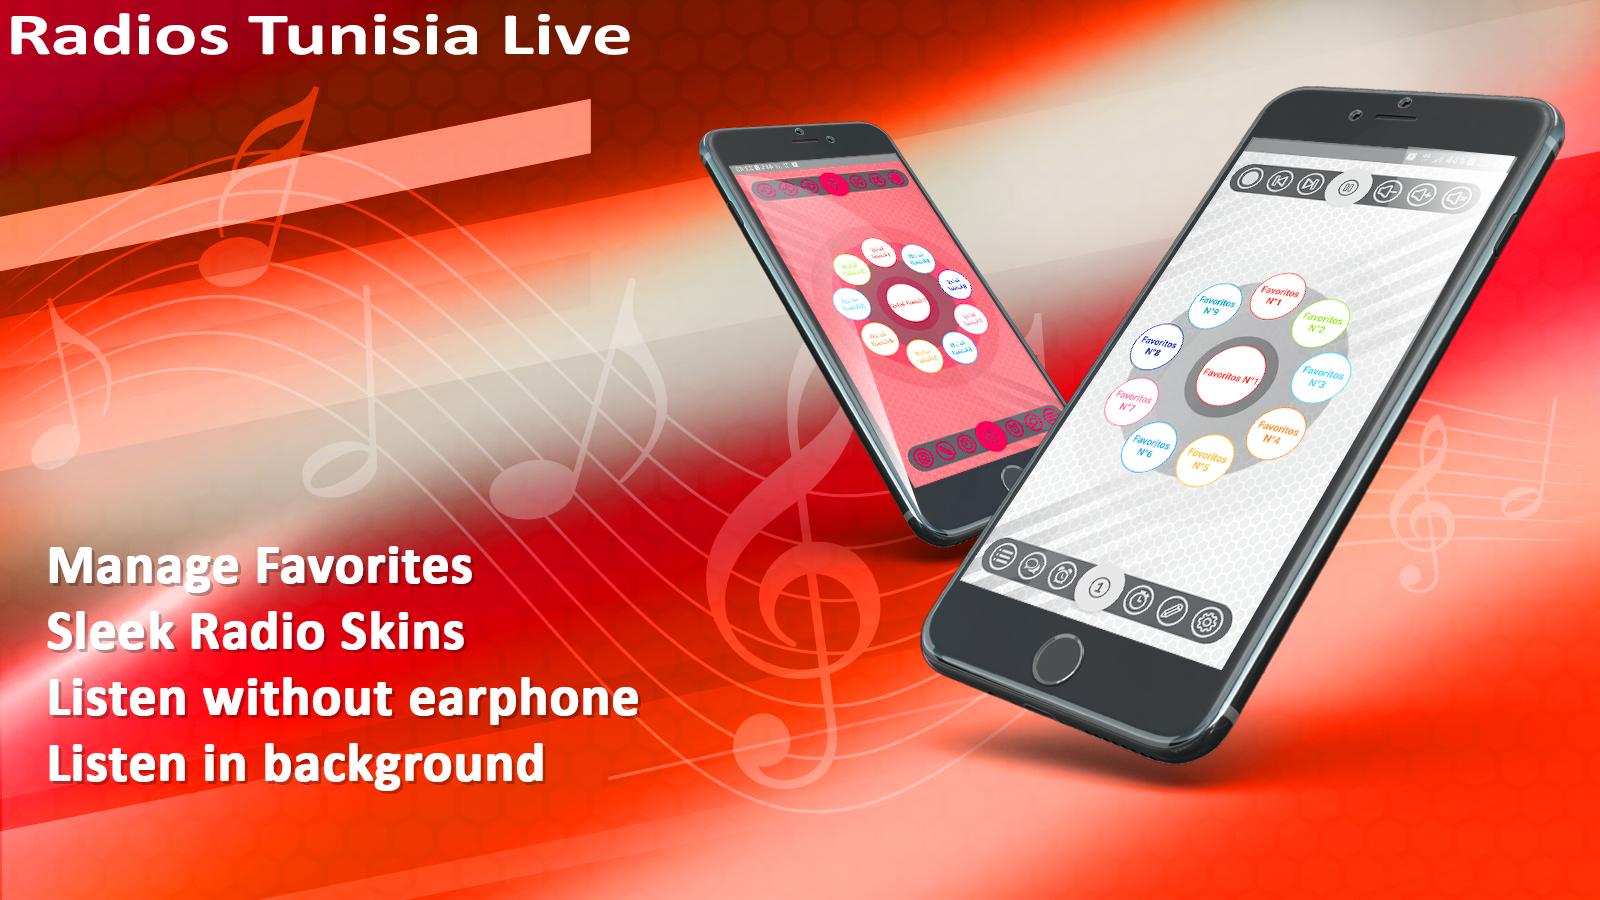 Radio Tunisia live | Record, Alarm& Timer for Android - APK Download